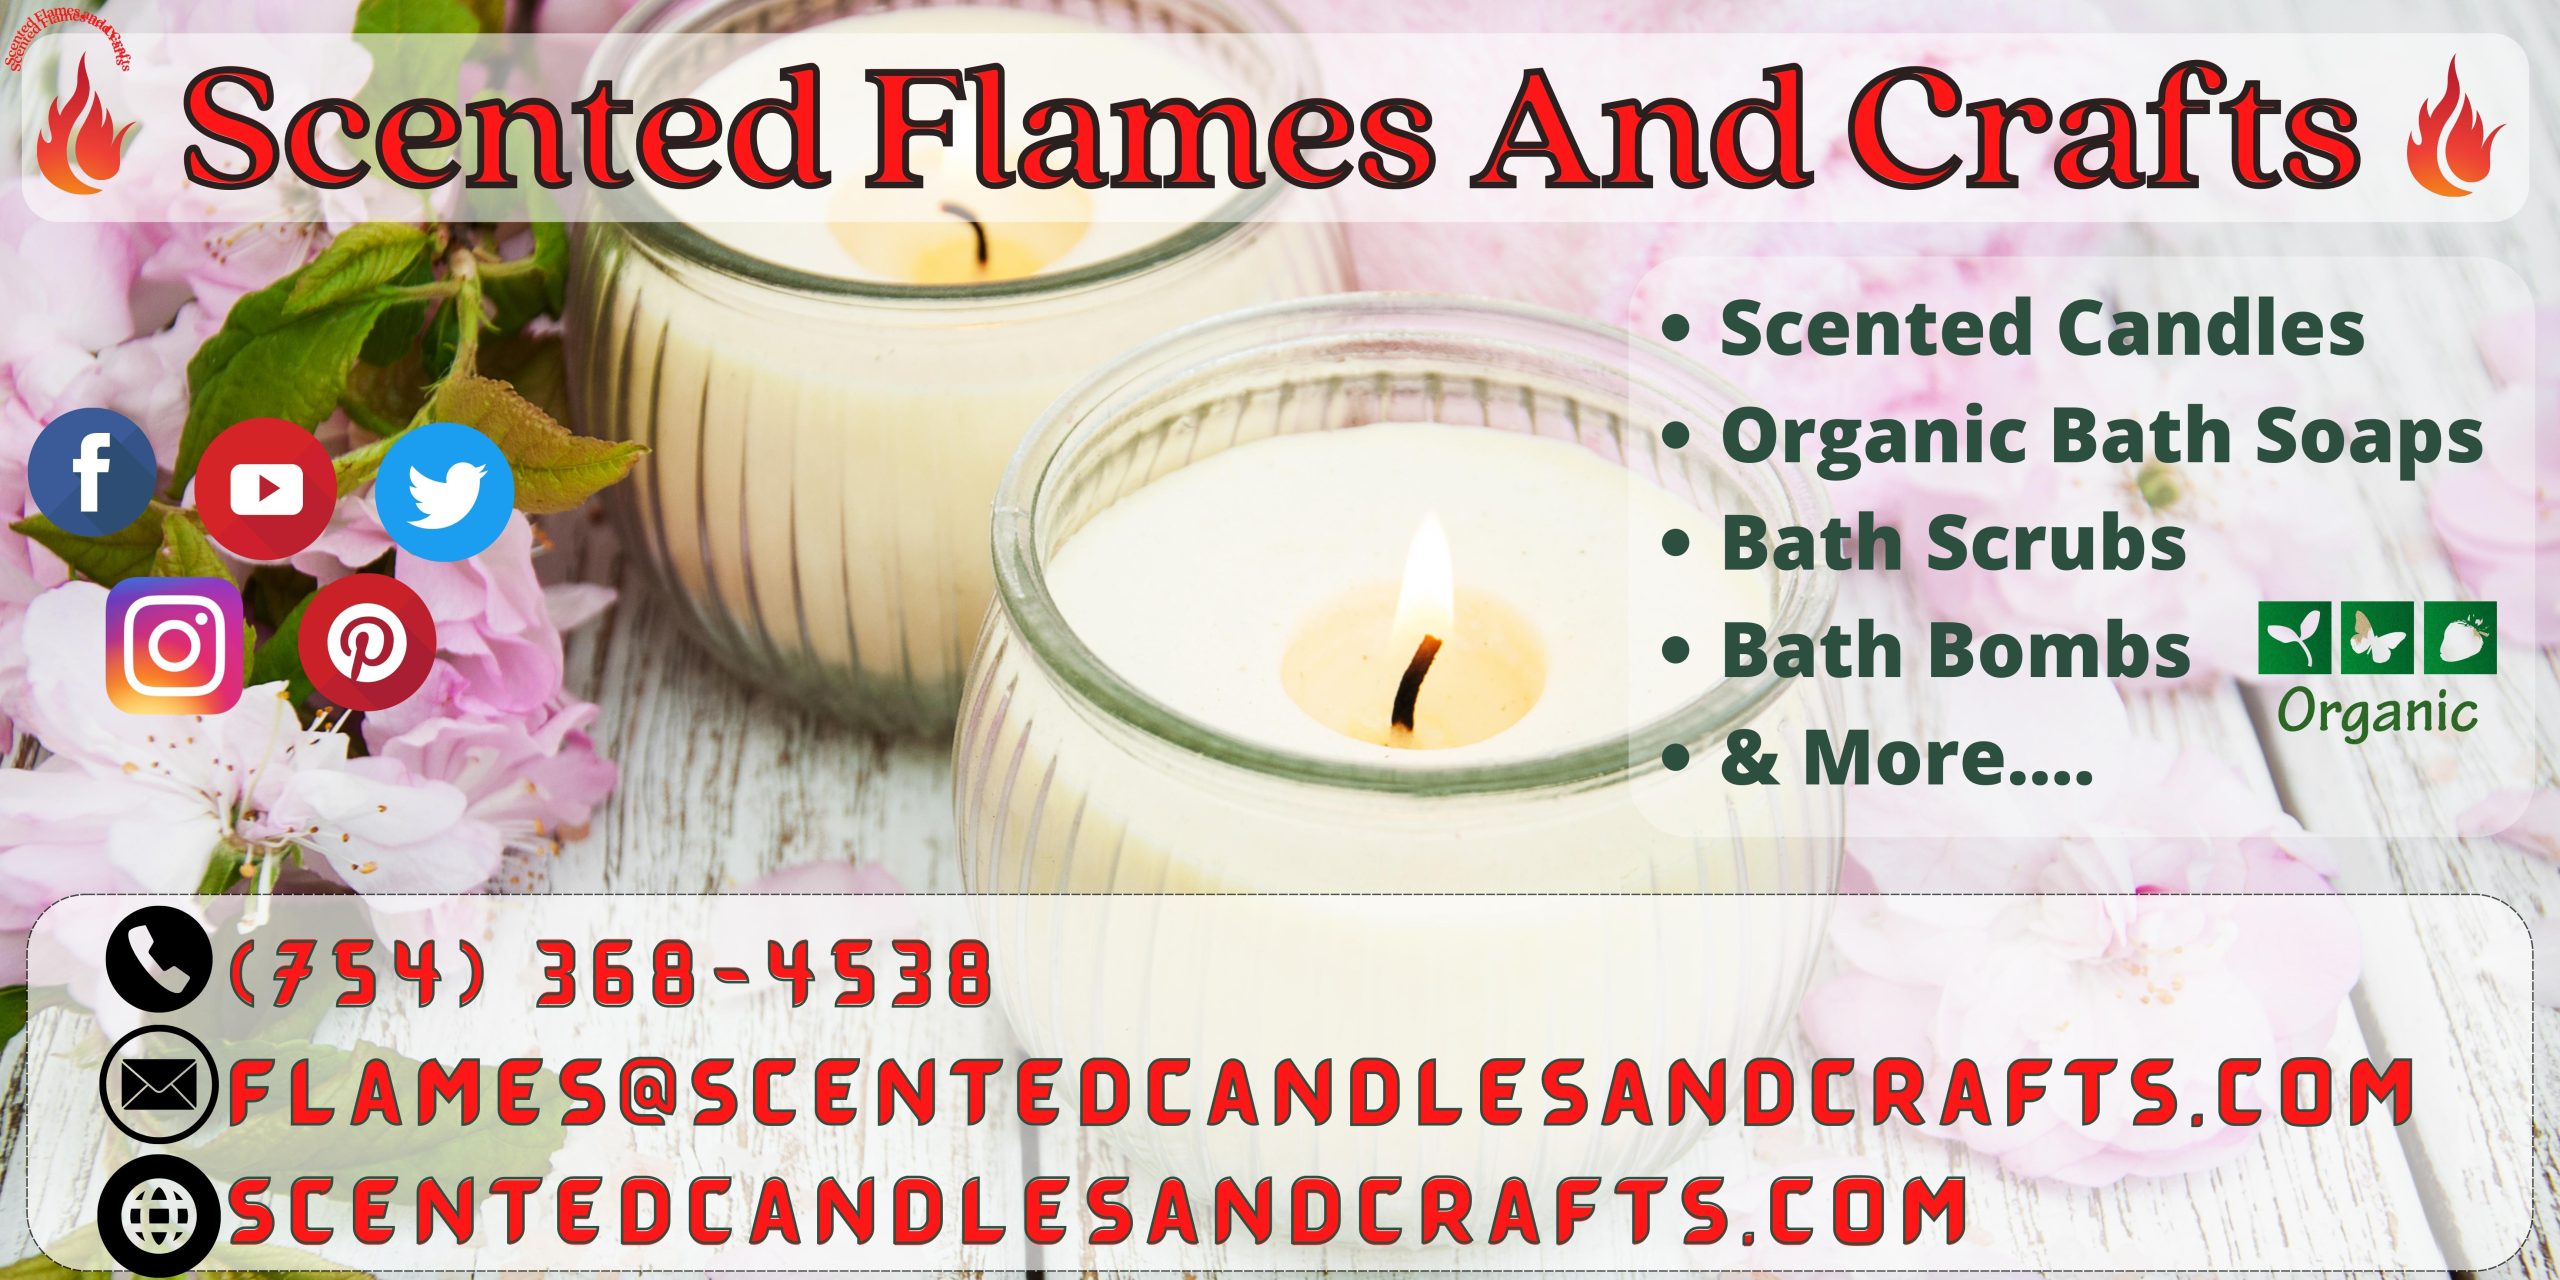 The Best Scented Candles and Crafts